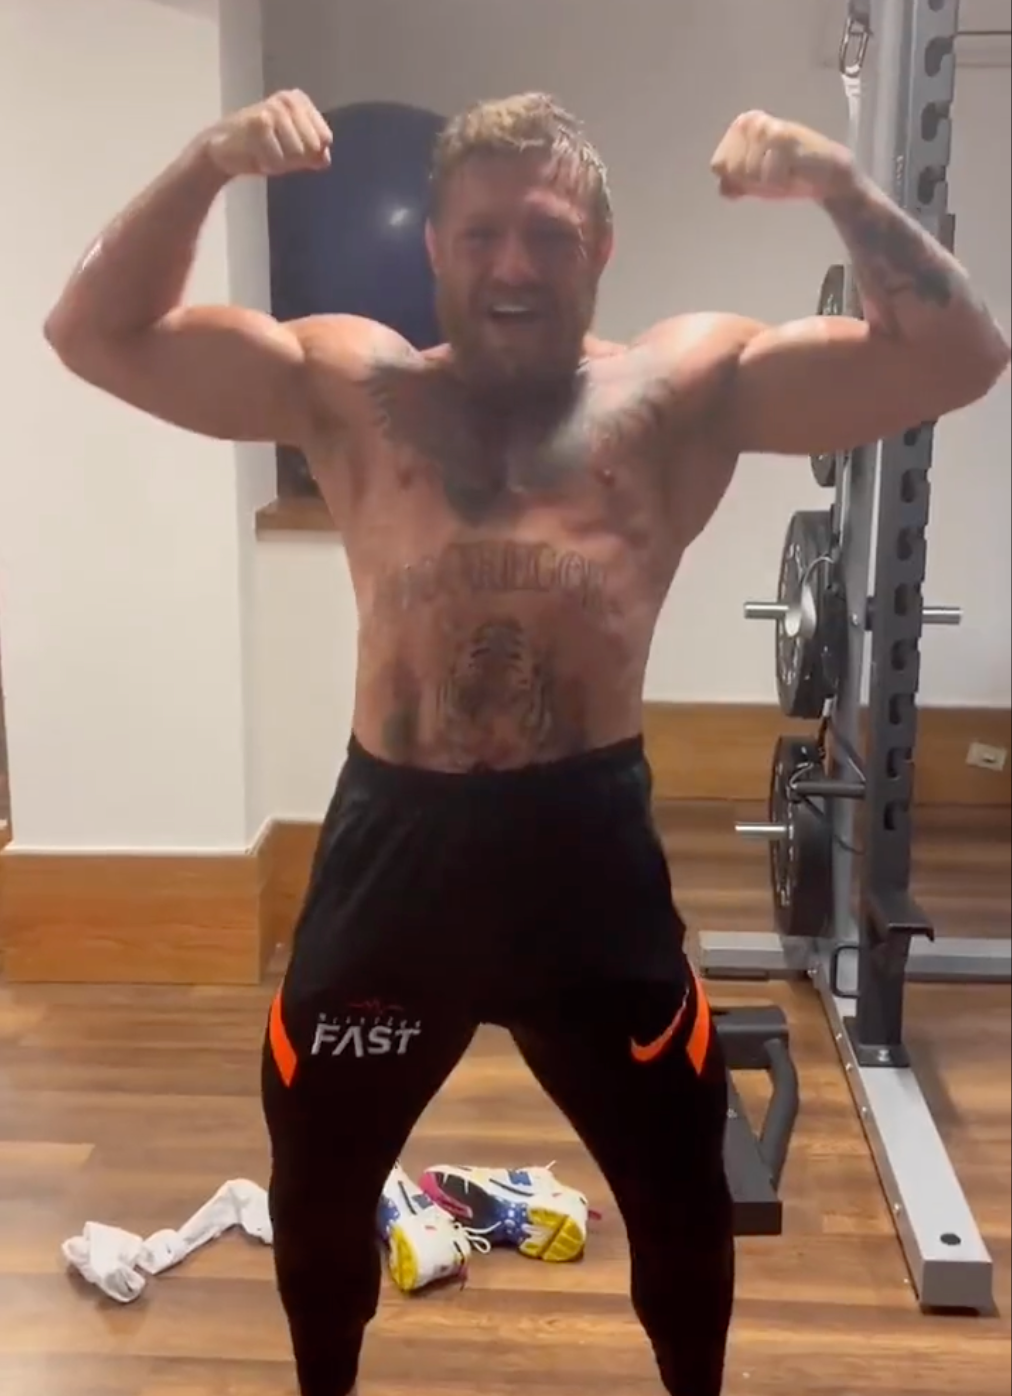 Conor McGregor UFC future: Notorious is looking incredibly jacked right now